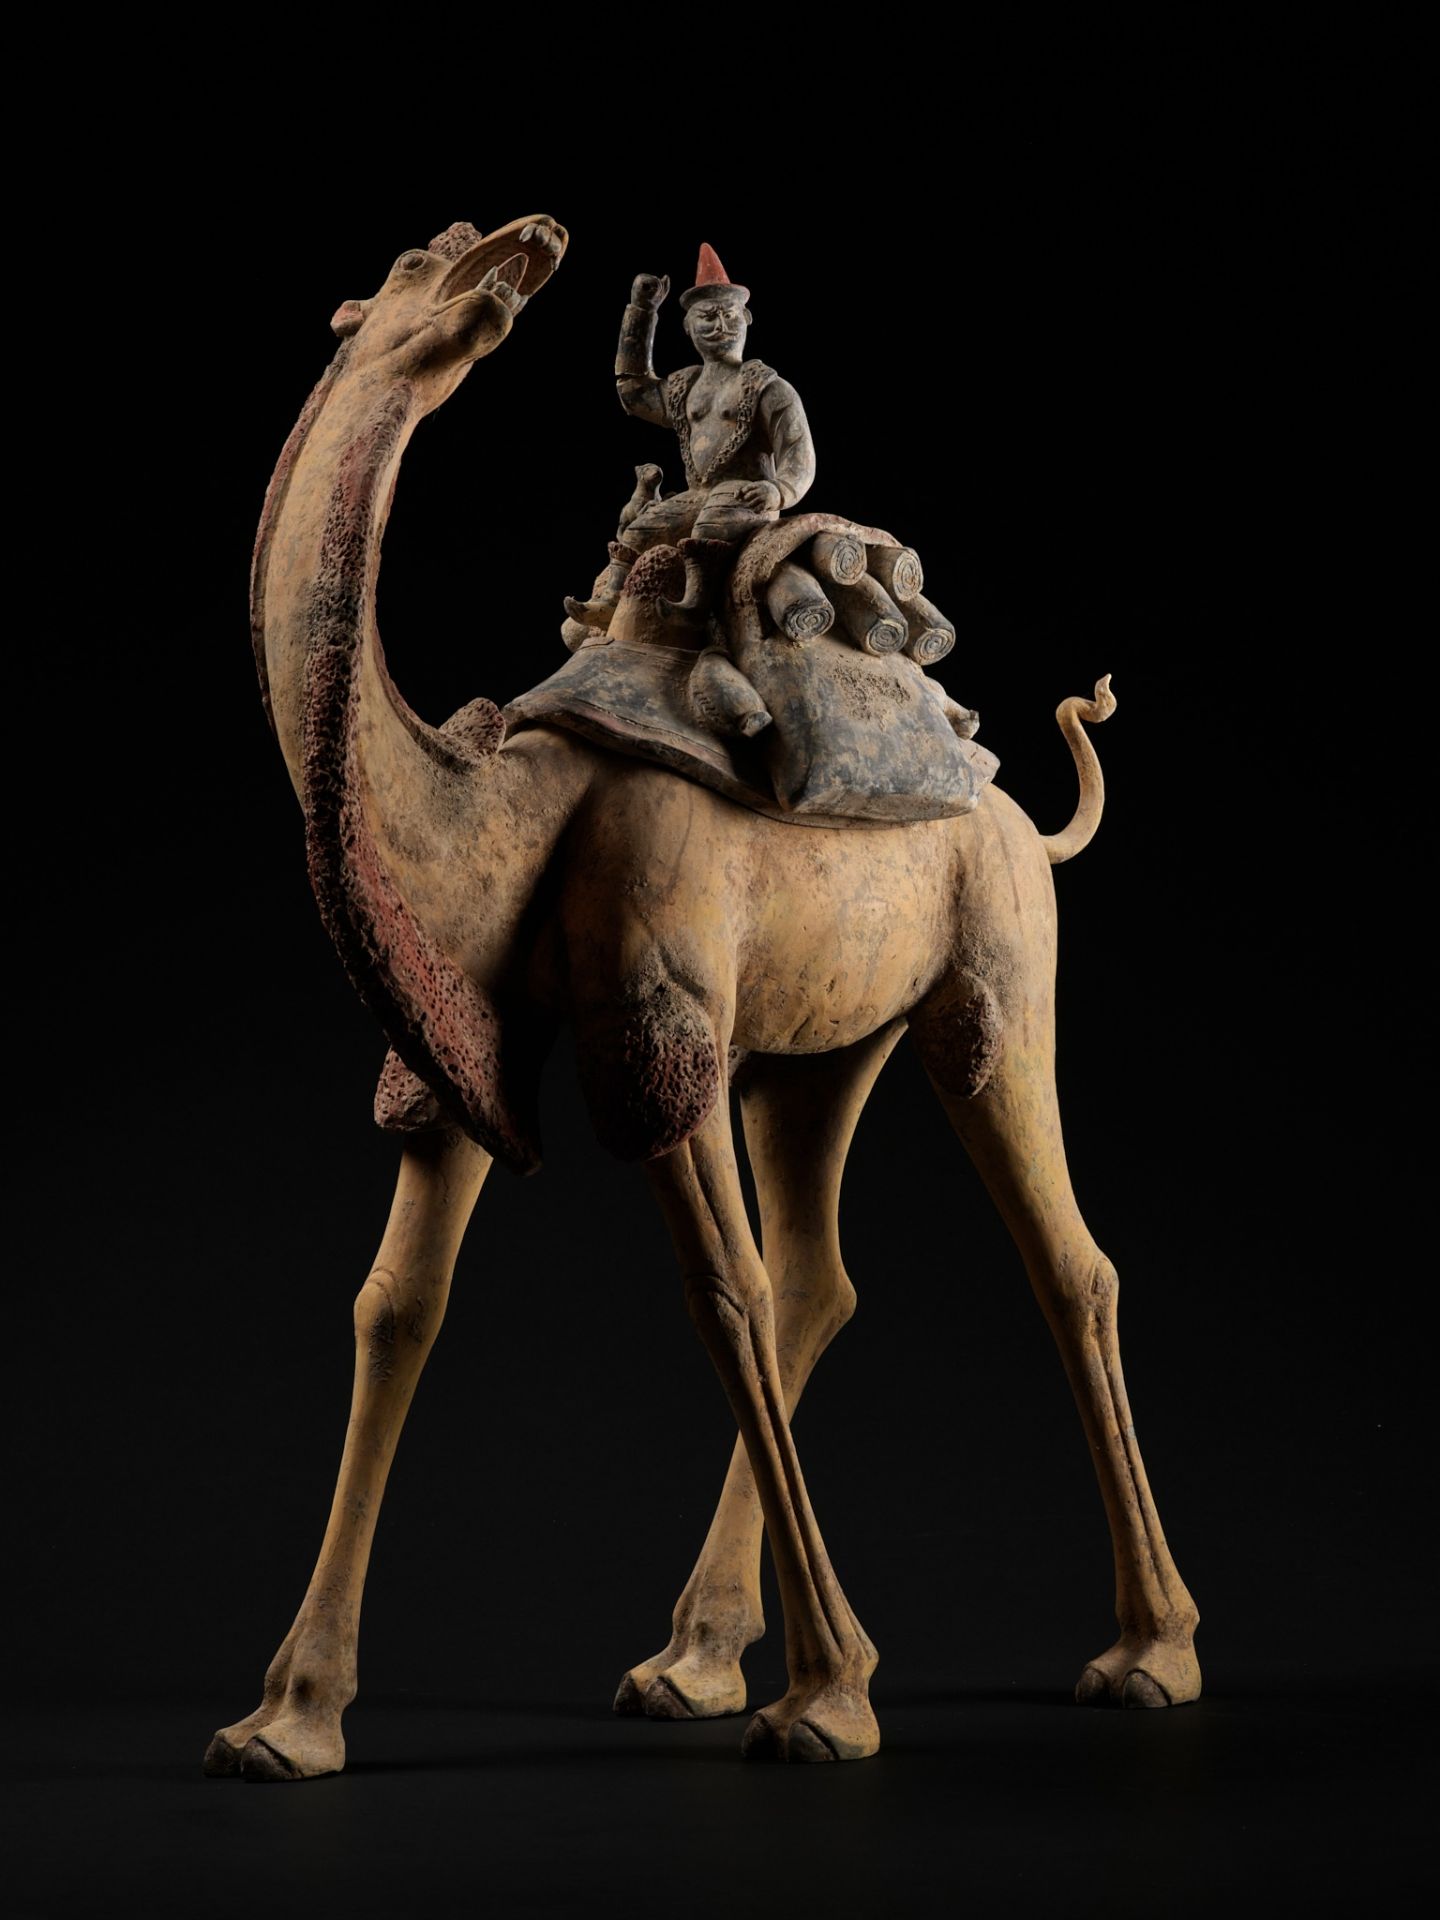 AN EXCEPTIONALLY LARGE PAINTED POTTERY FIGURE OF A BACTRIAN CAMEL AND A SOGDIAN RIDER, TANG DYNASTY - Image 2 of 12